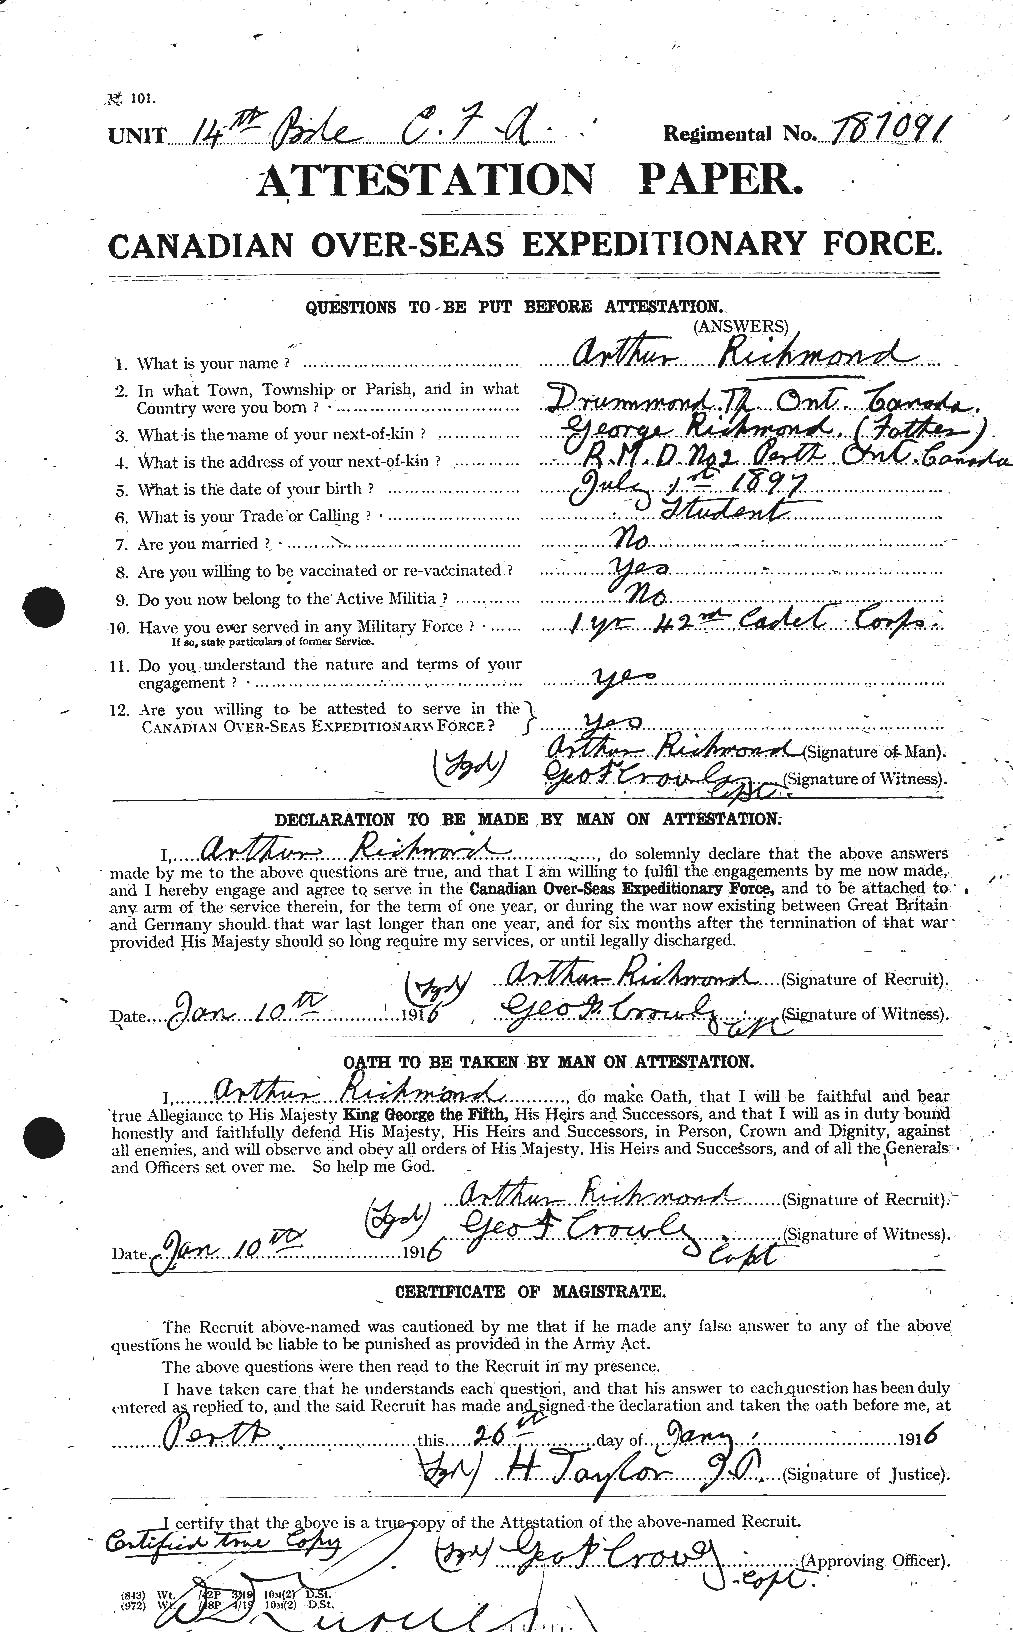 Personnel Records of the First World War - CEF 605888a